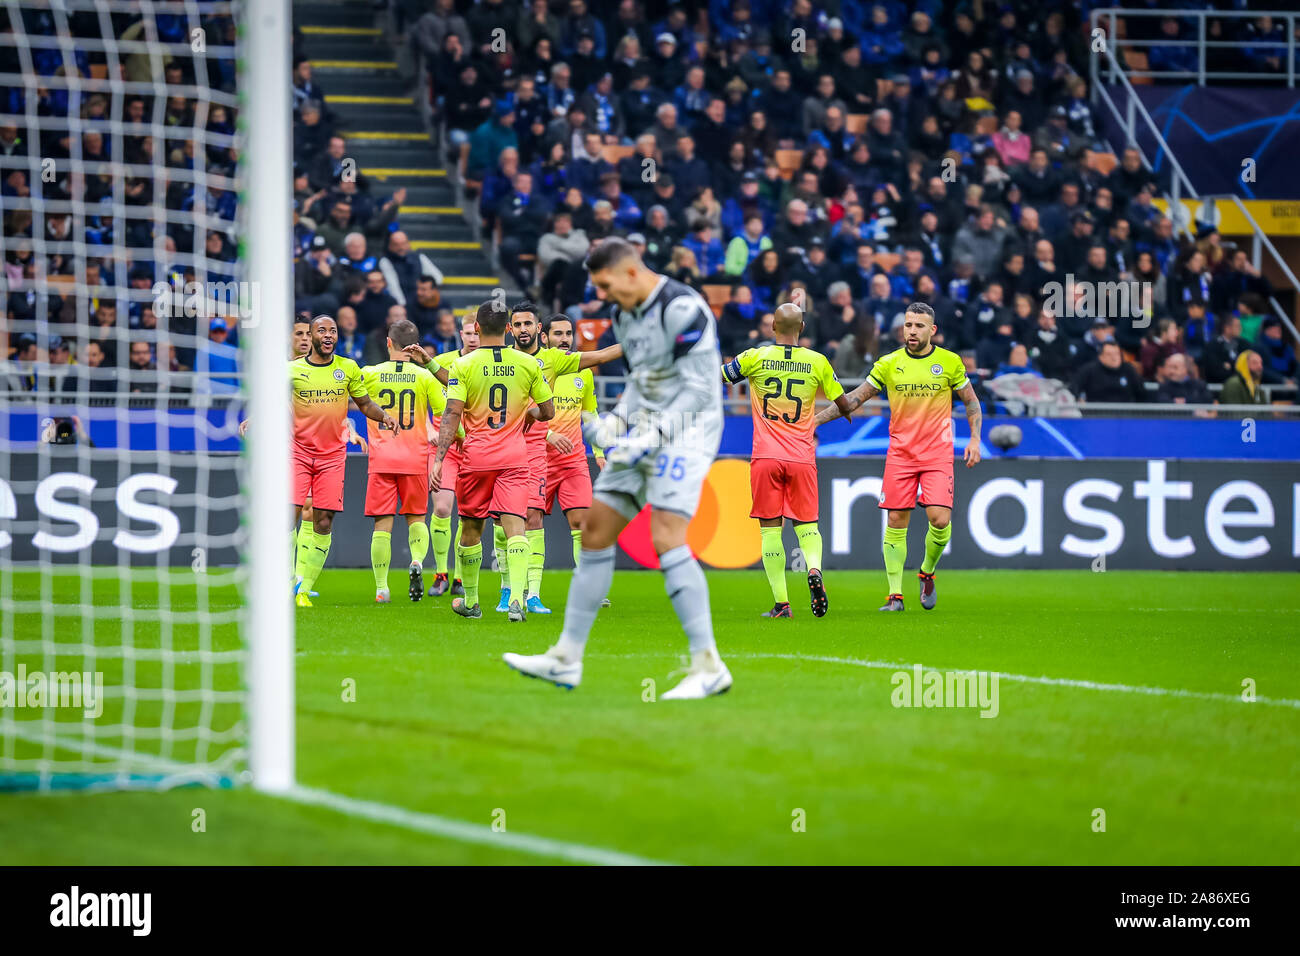 Milano, Italy. 6th Nov, 2019. goal raheem sterling (manchester city)during Tournament round, group C, Atalanta vs Manchester City, Soccer Champions League Men Championship in Milano, Italy, November 06 2019 - LPS/Fabrizio Carabelli Credit: Fabrizio Carabelli/LPS/ZUMA Wire/Alamy Live News Stock Photo